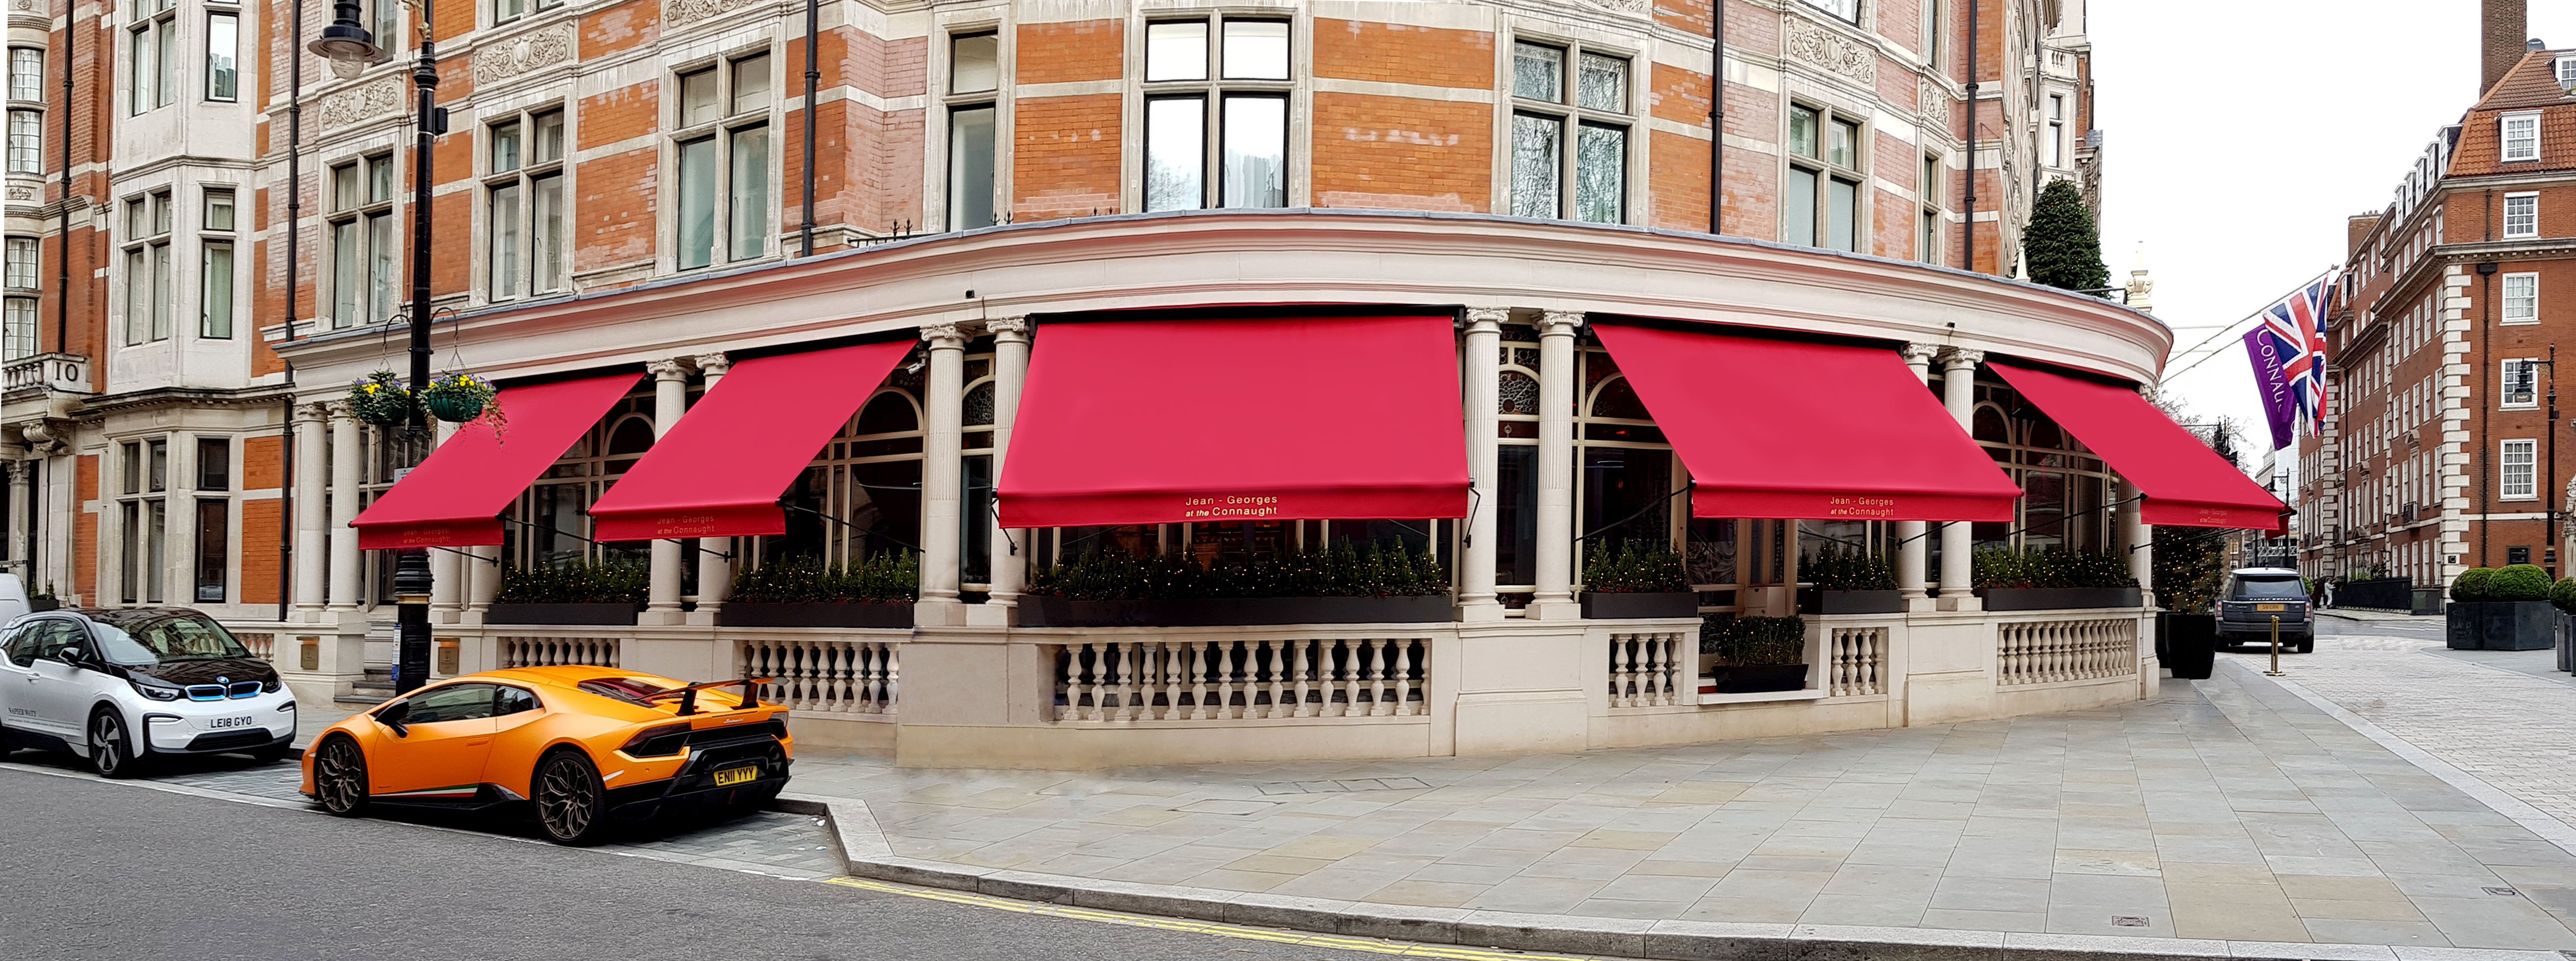 Awnings Connaught hotel